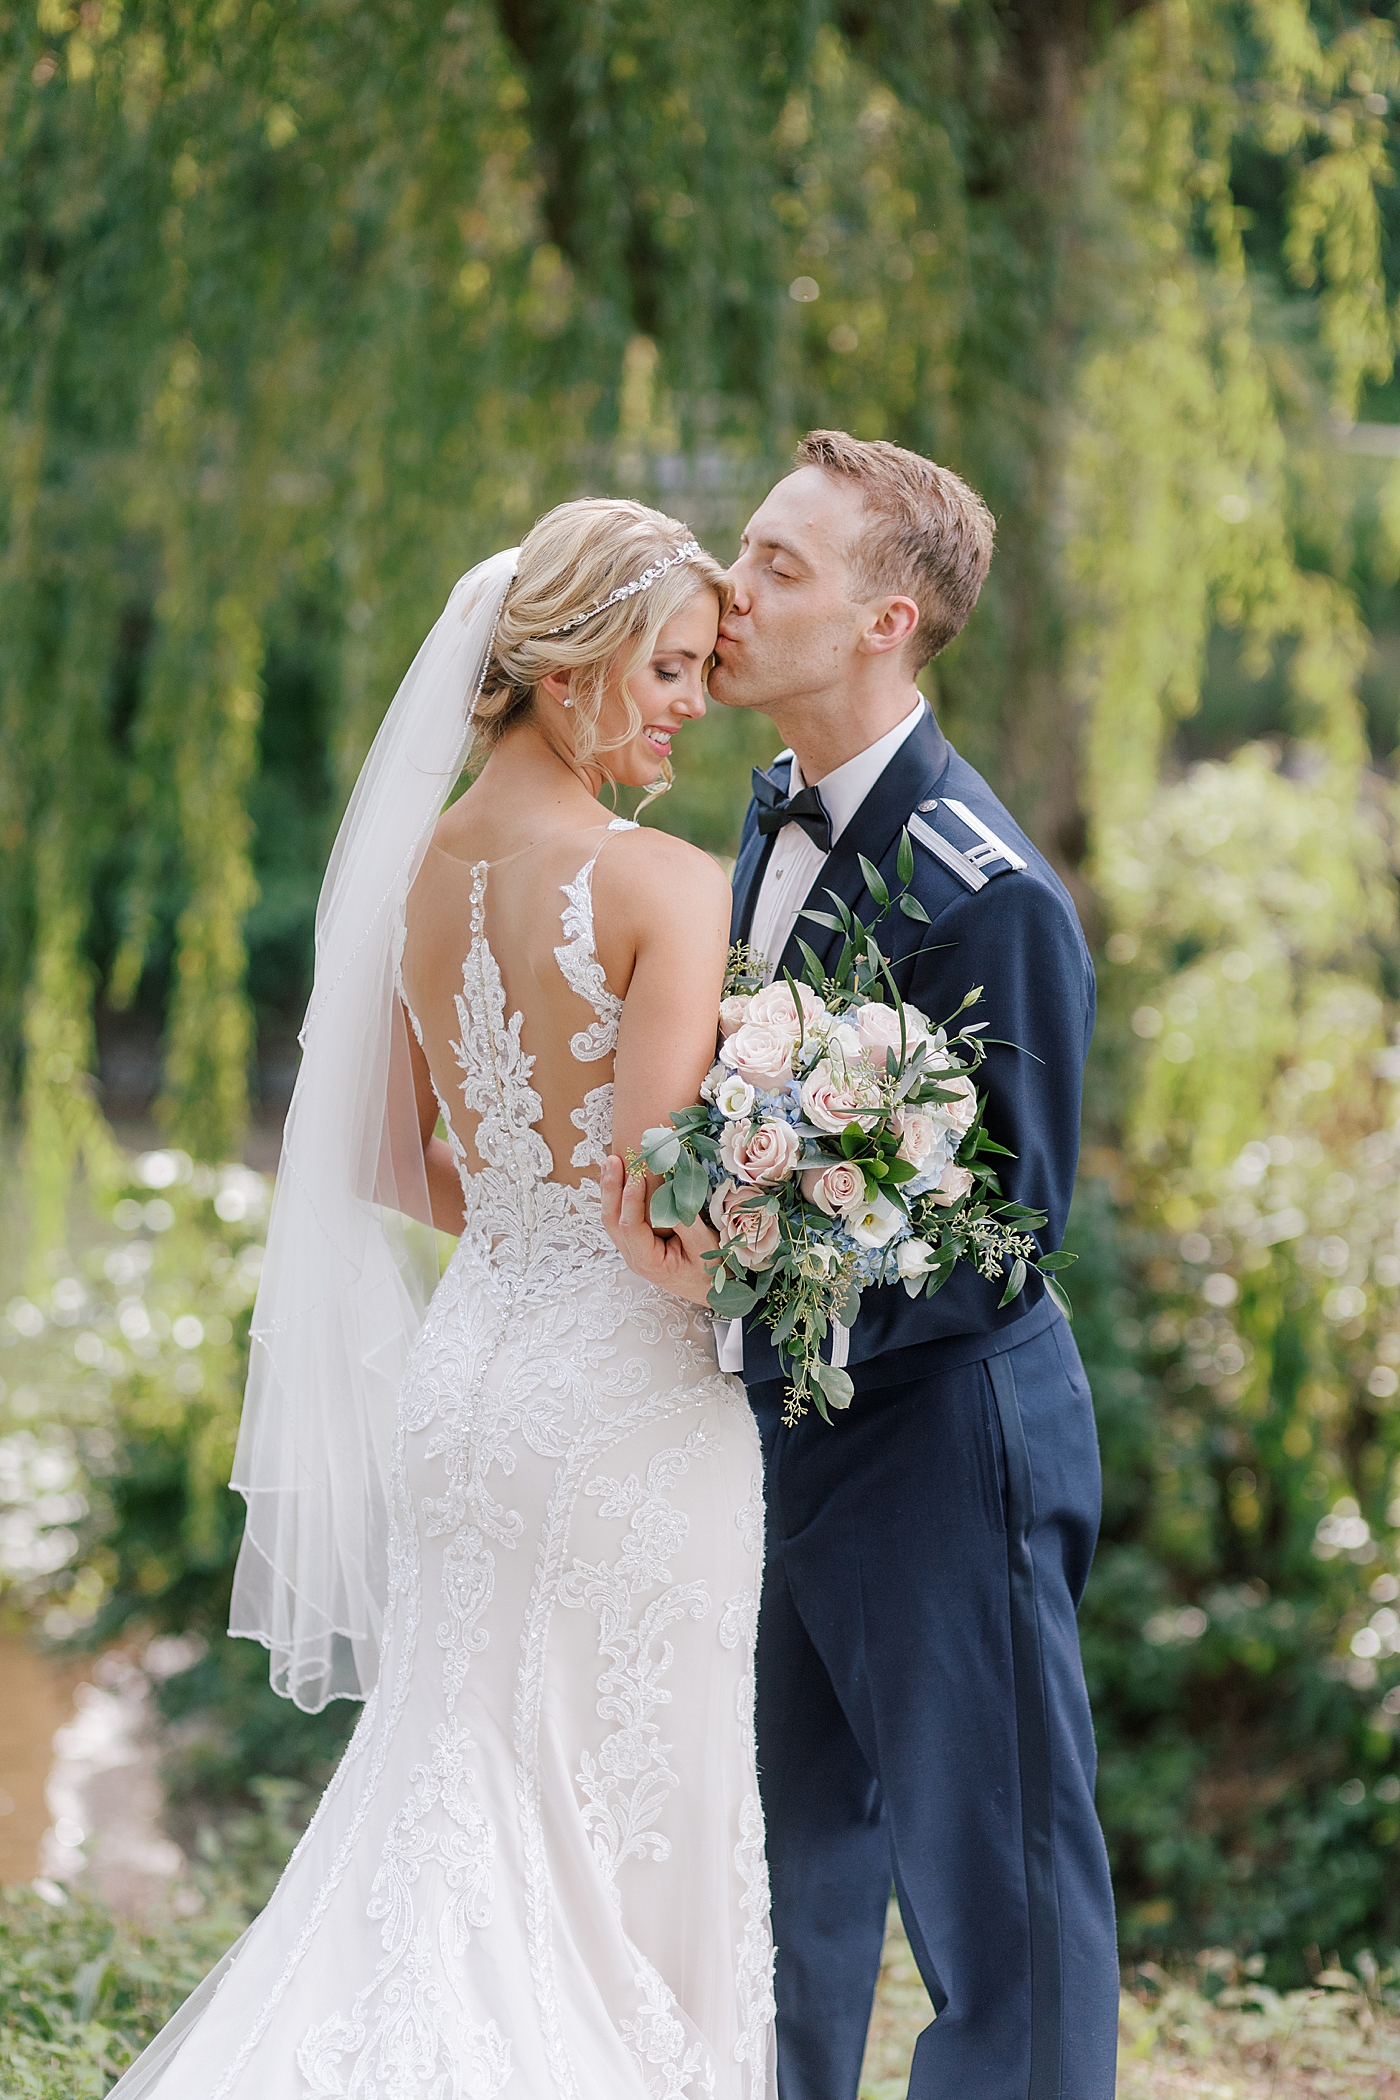 Bride and groom embrace after River House Odette's Wedding | Image by Hope Helmuth Photography